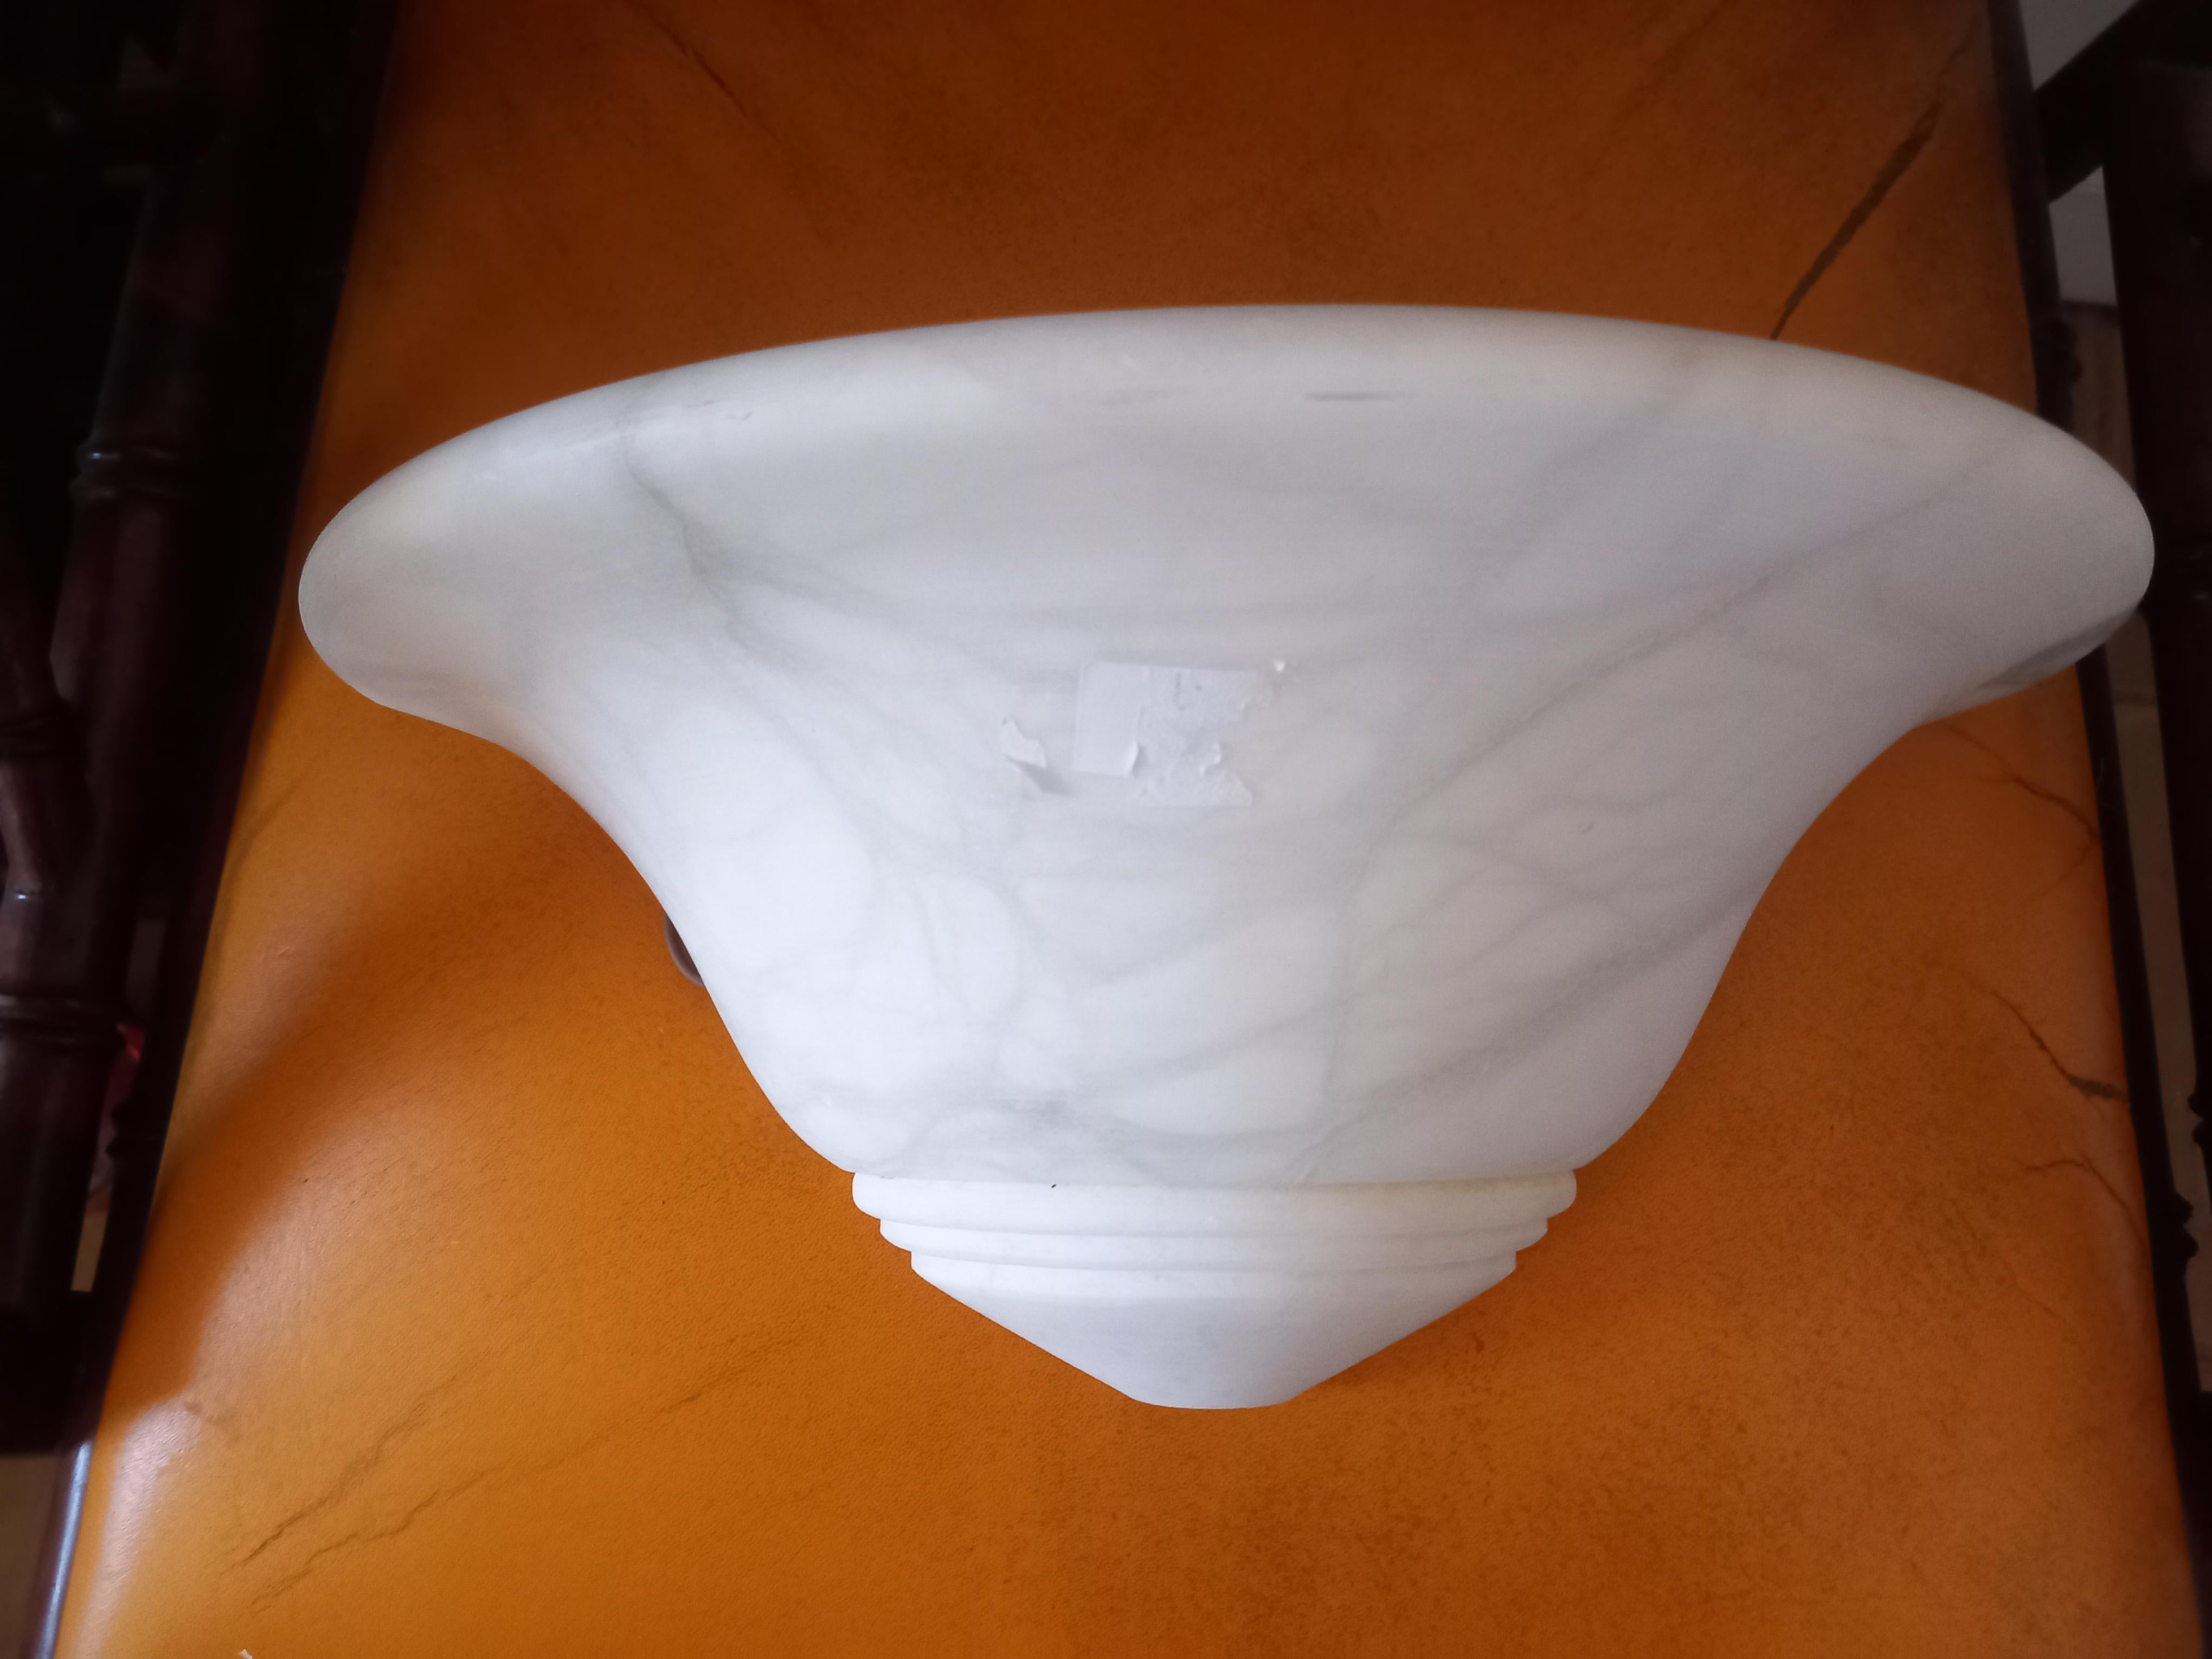 White  alabaster sconces
It is a very special piece, the white is very pure and one of them has a nice gray streak so characteristic, looking very pretty when illuminated
their shapes are rounded,
It is in excellent condition, like new. 
New wiring.